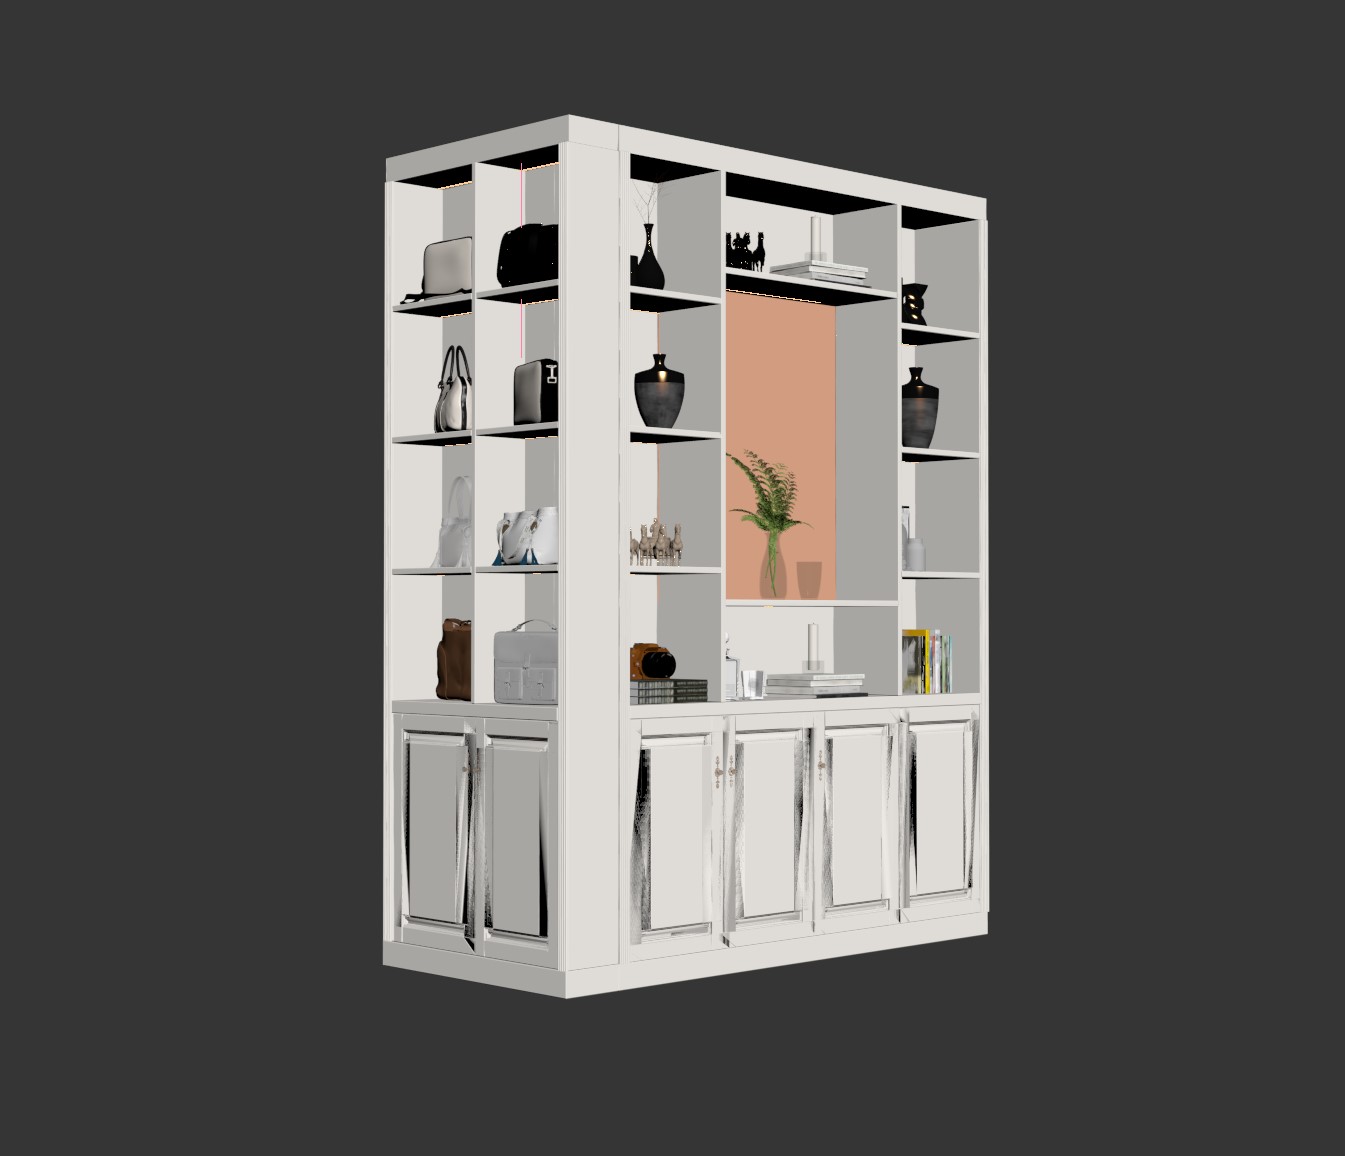 9829. 3D Wardrobe Model For Free Download by Tran Trung Hieu